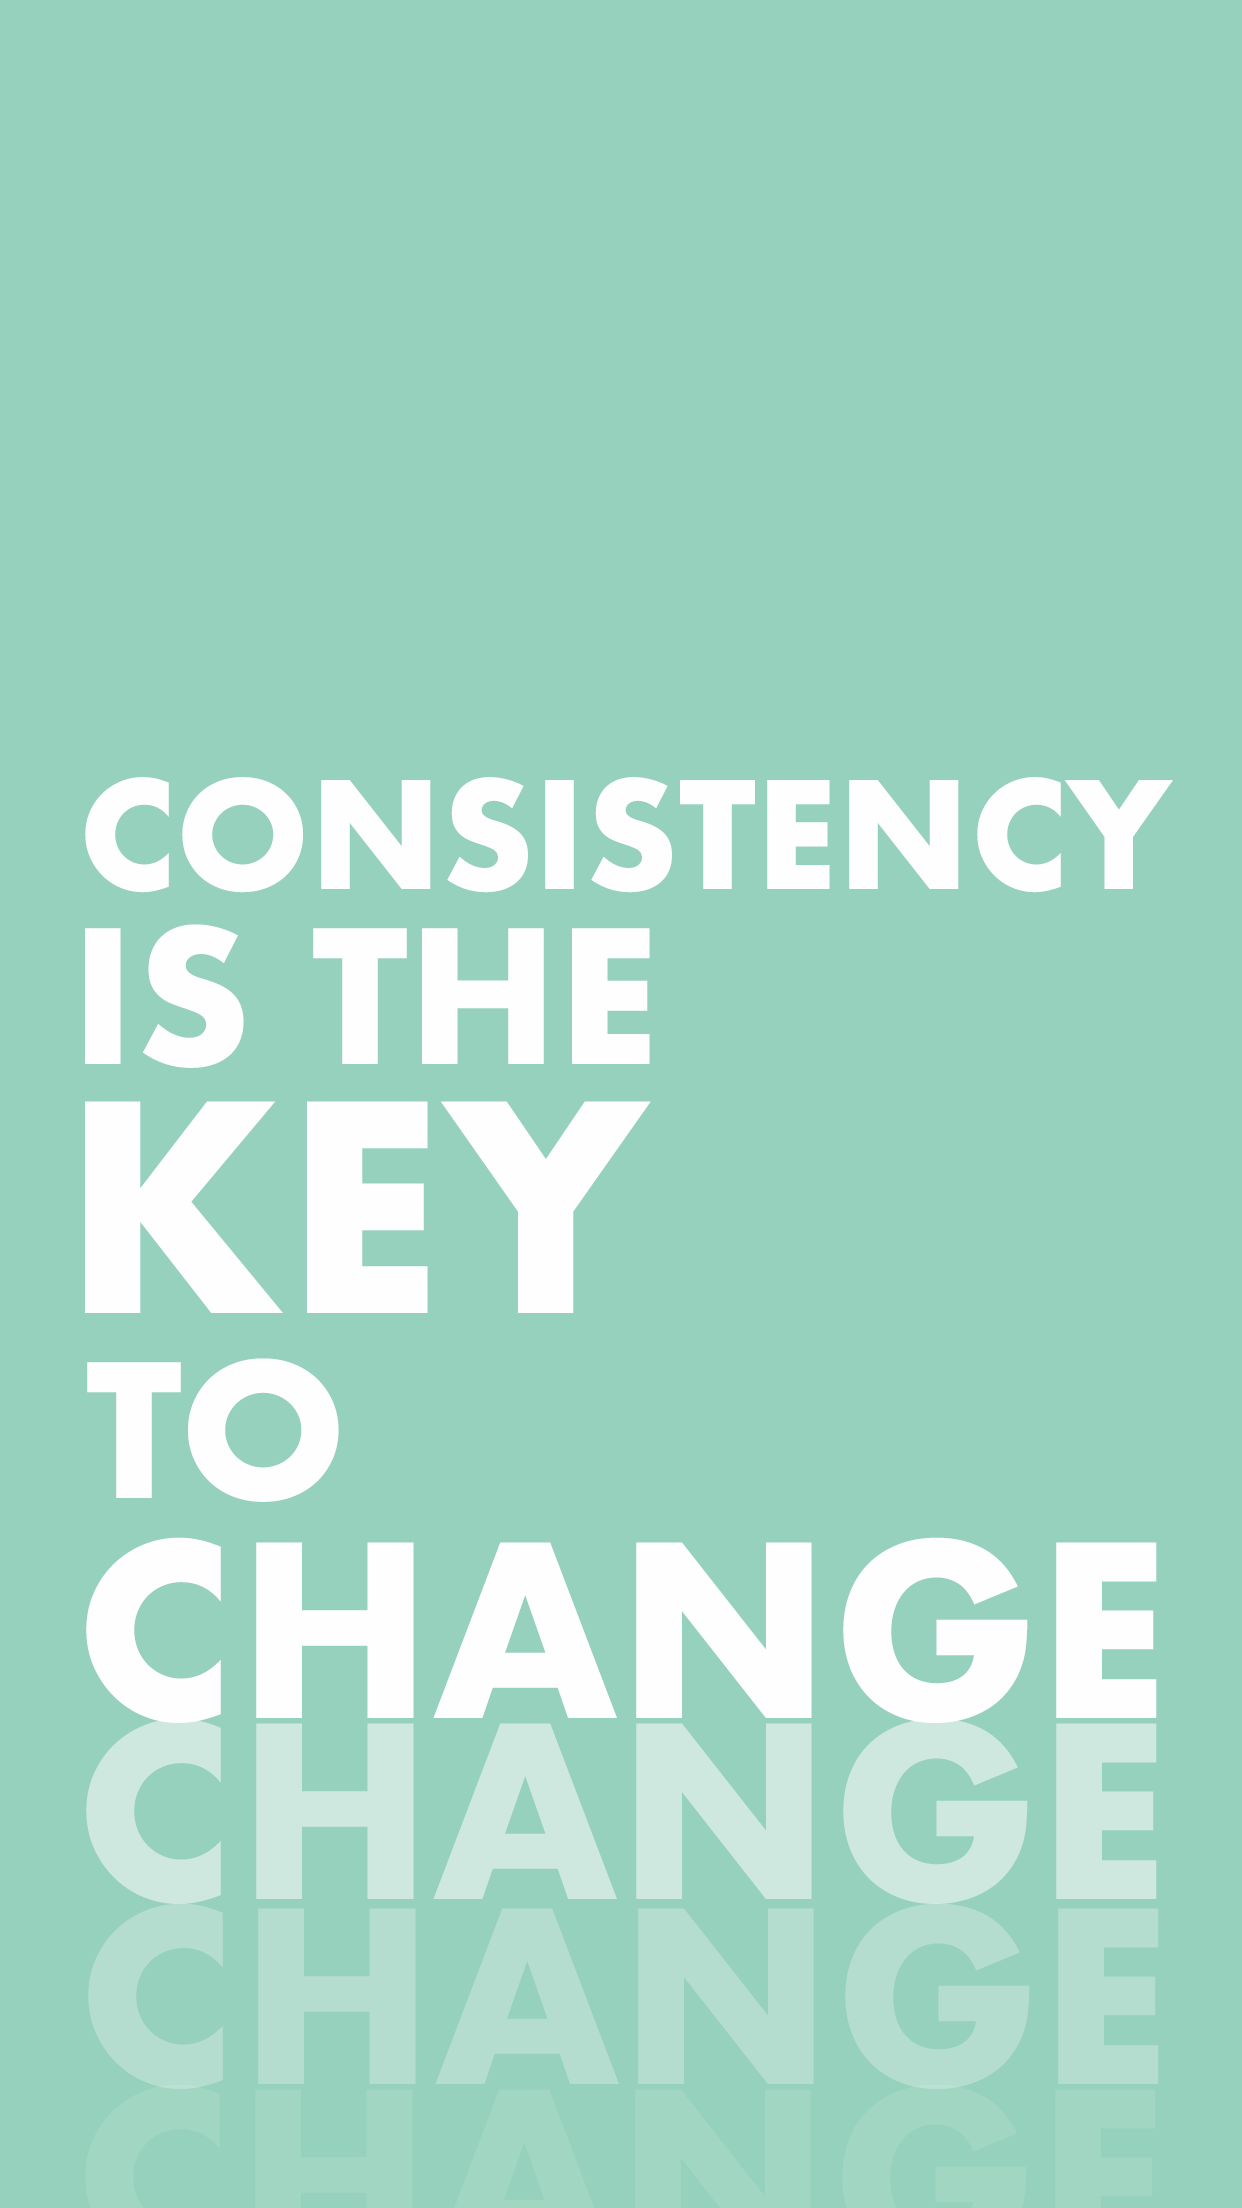 Consistency Wallpaper Free Consistency Background